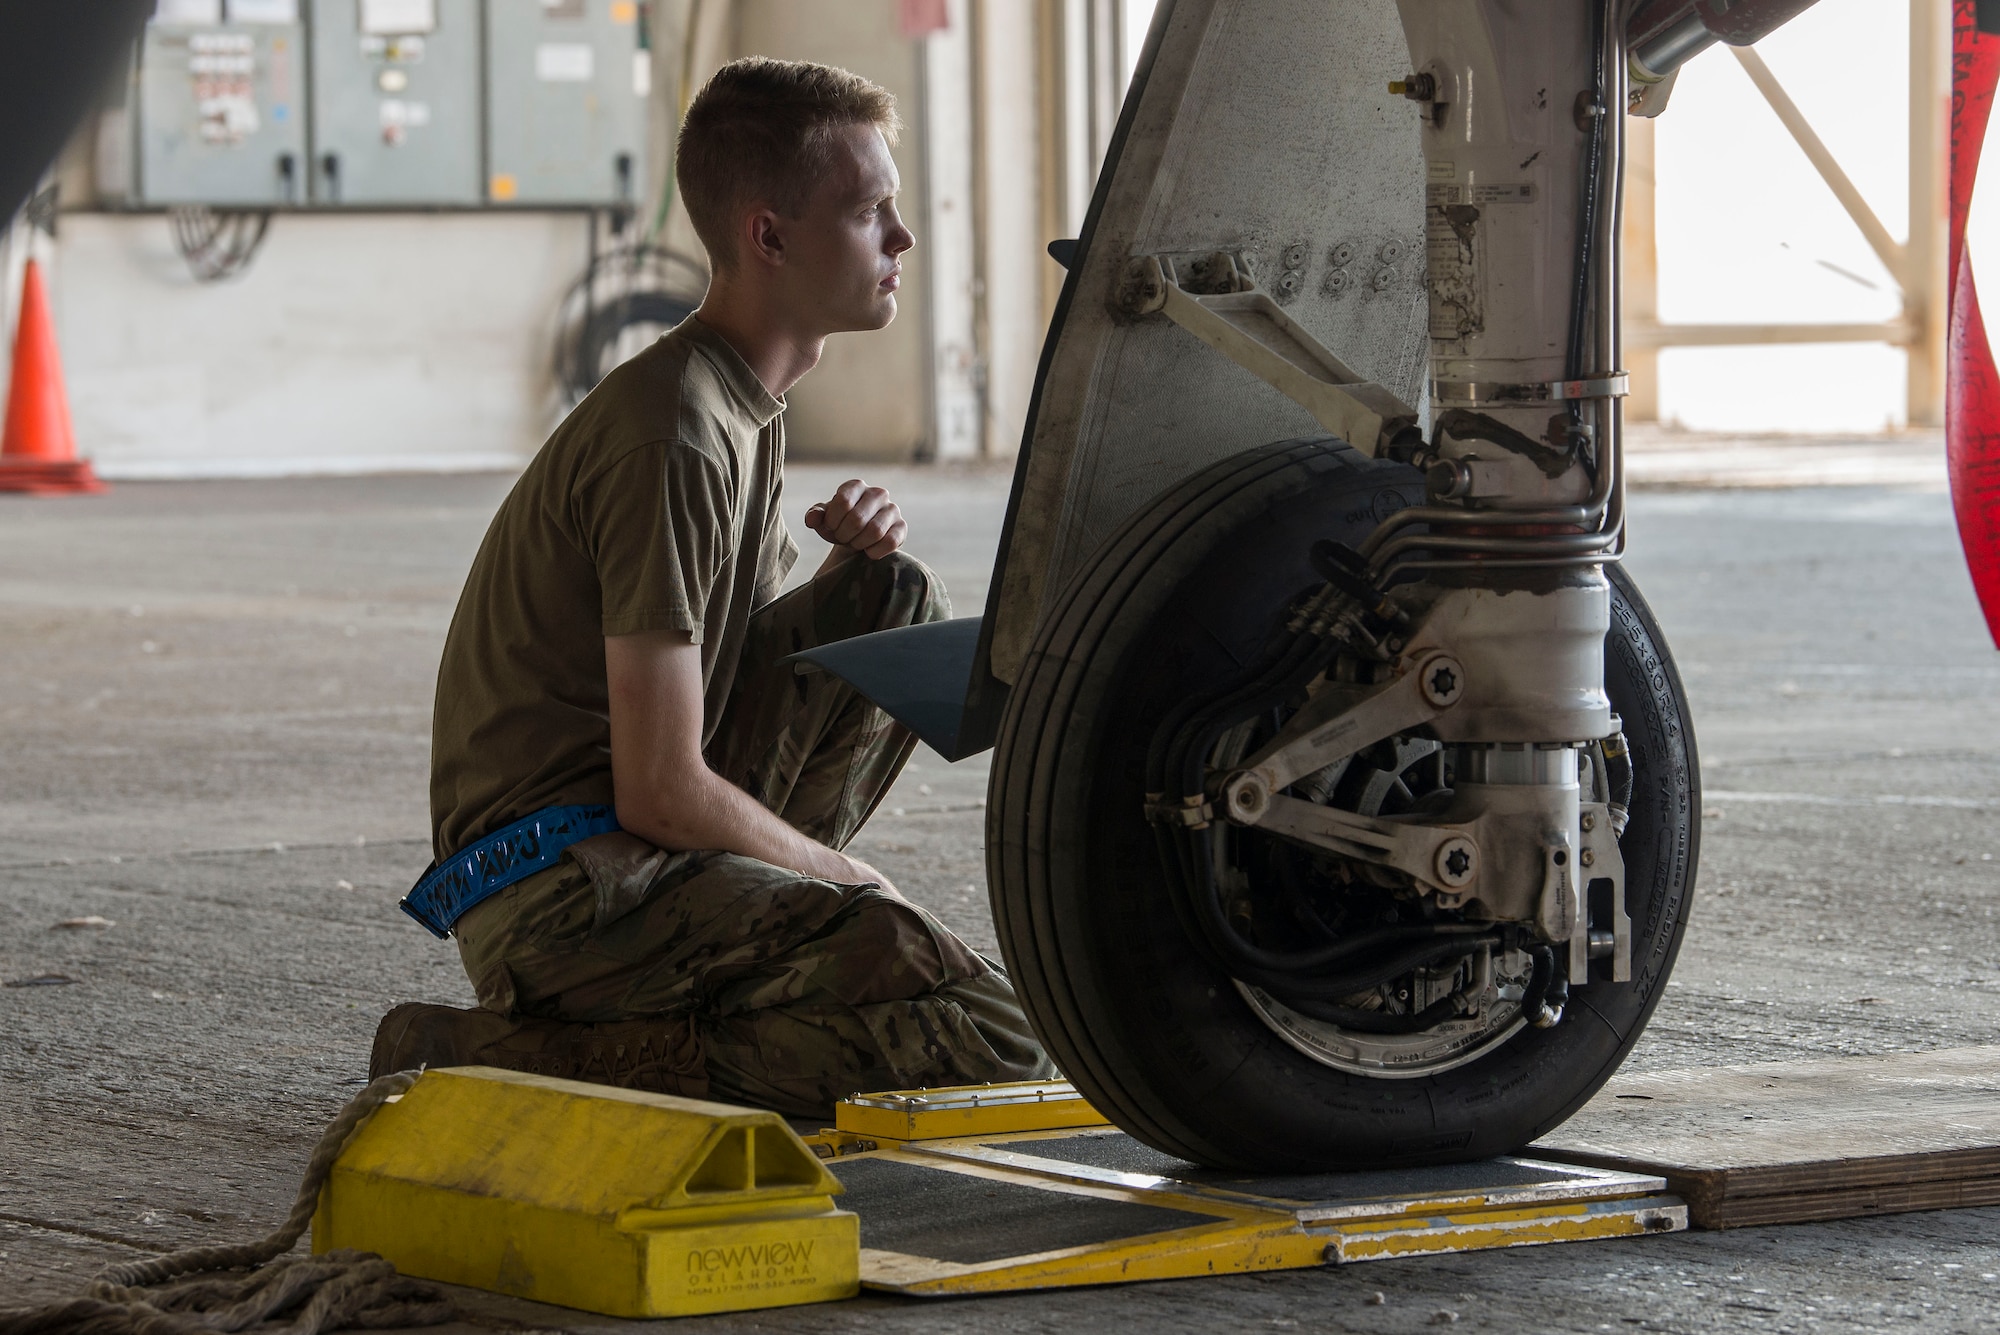 U.S. Air Force Airman 1st Class Trey Trimble, 380th Expeditionary Aircraft Maintenance Squadron crew chief, weighs an RQ-4 Global Hawk unmanned aerial vehicle following refueling at Al Dhafra Air Base, United Arab Emirates, Nov. 3, 2020.